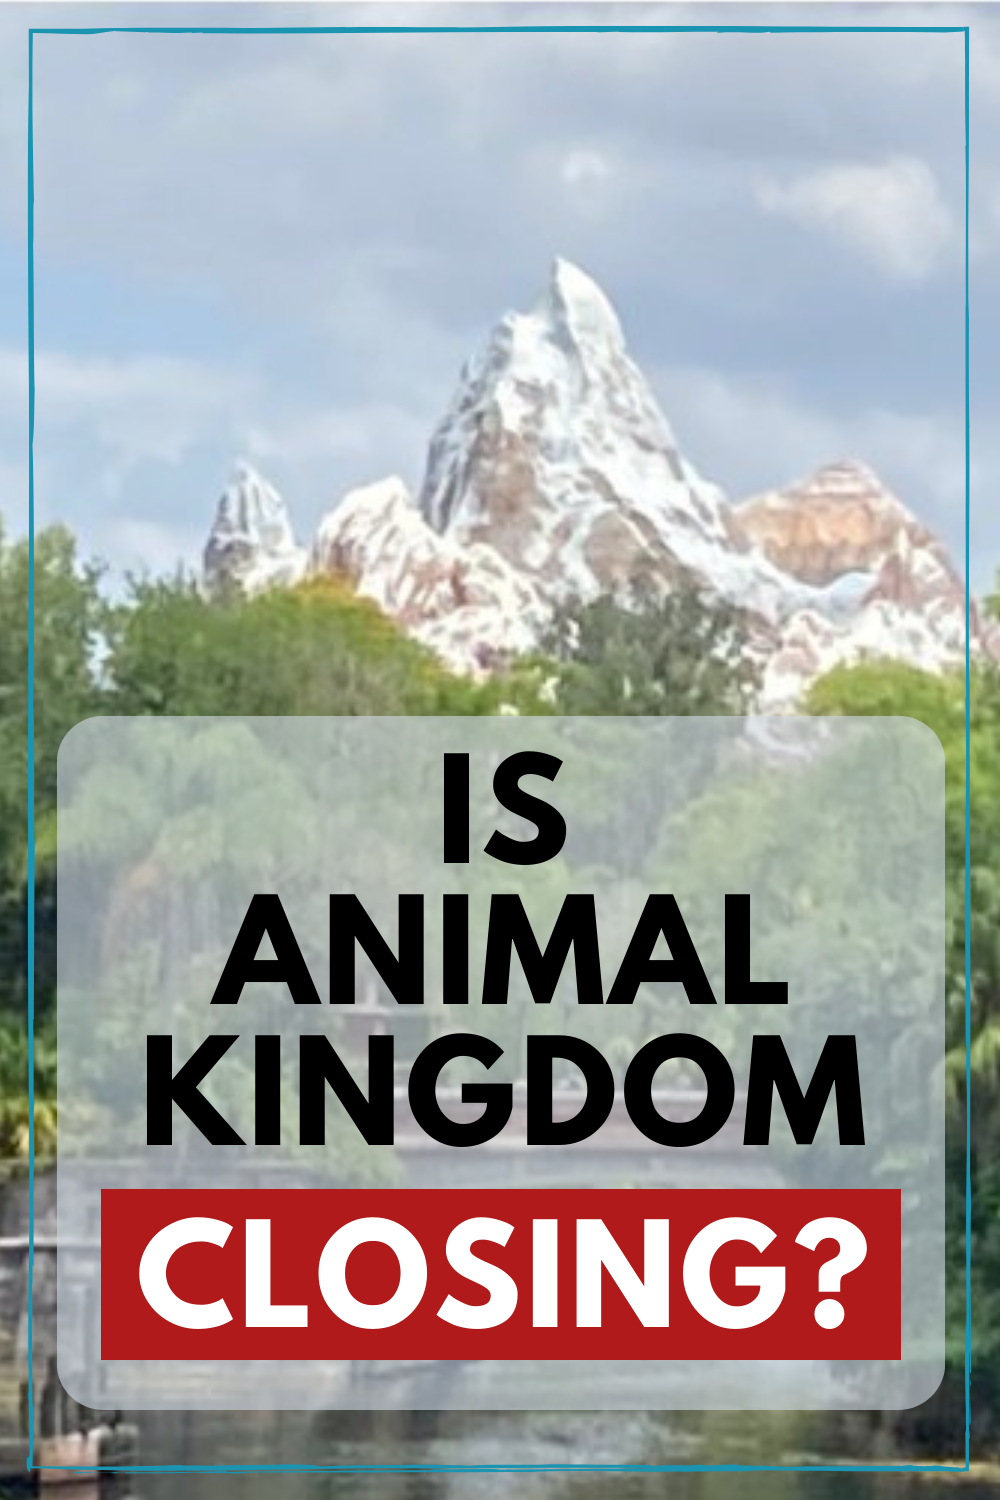 Rumors about Animal Kingdom closing have been circulating. Put these rumors to rest and find out where they came from. Find some other Animal Kingdom Fun Facts for the upcoming year as well.